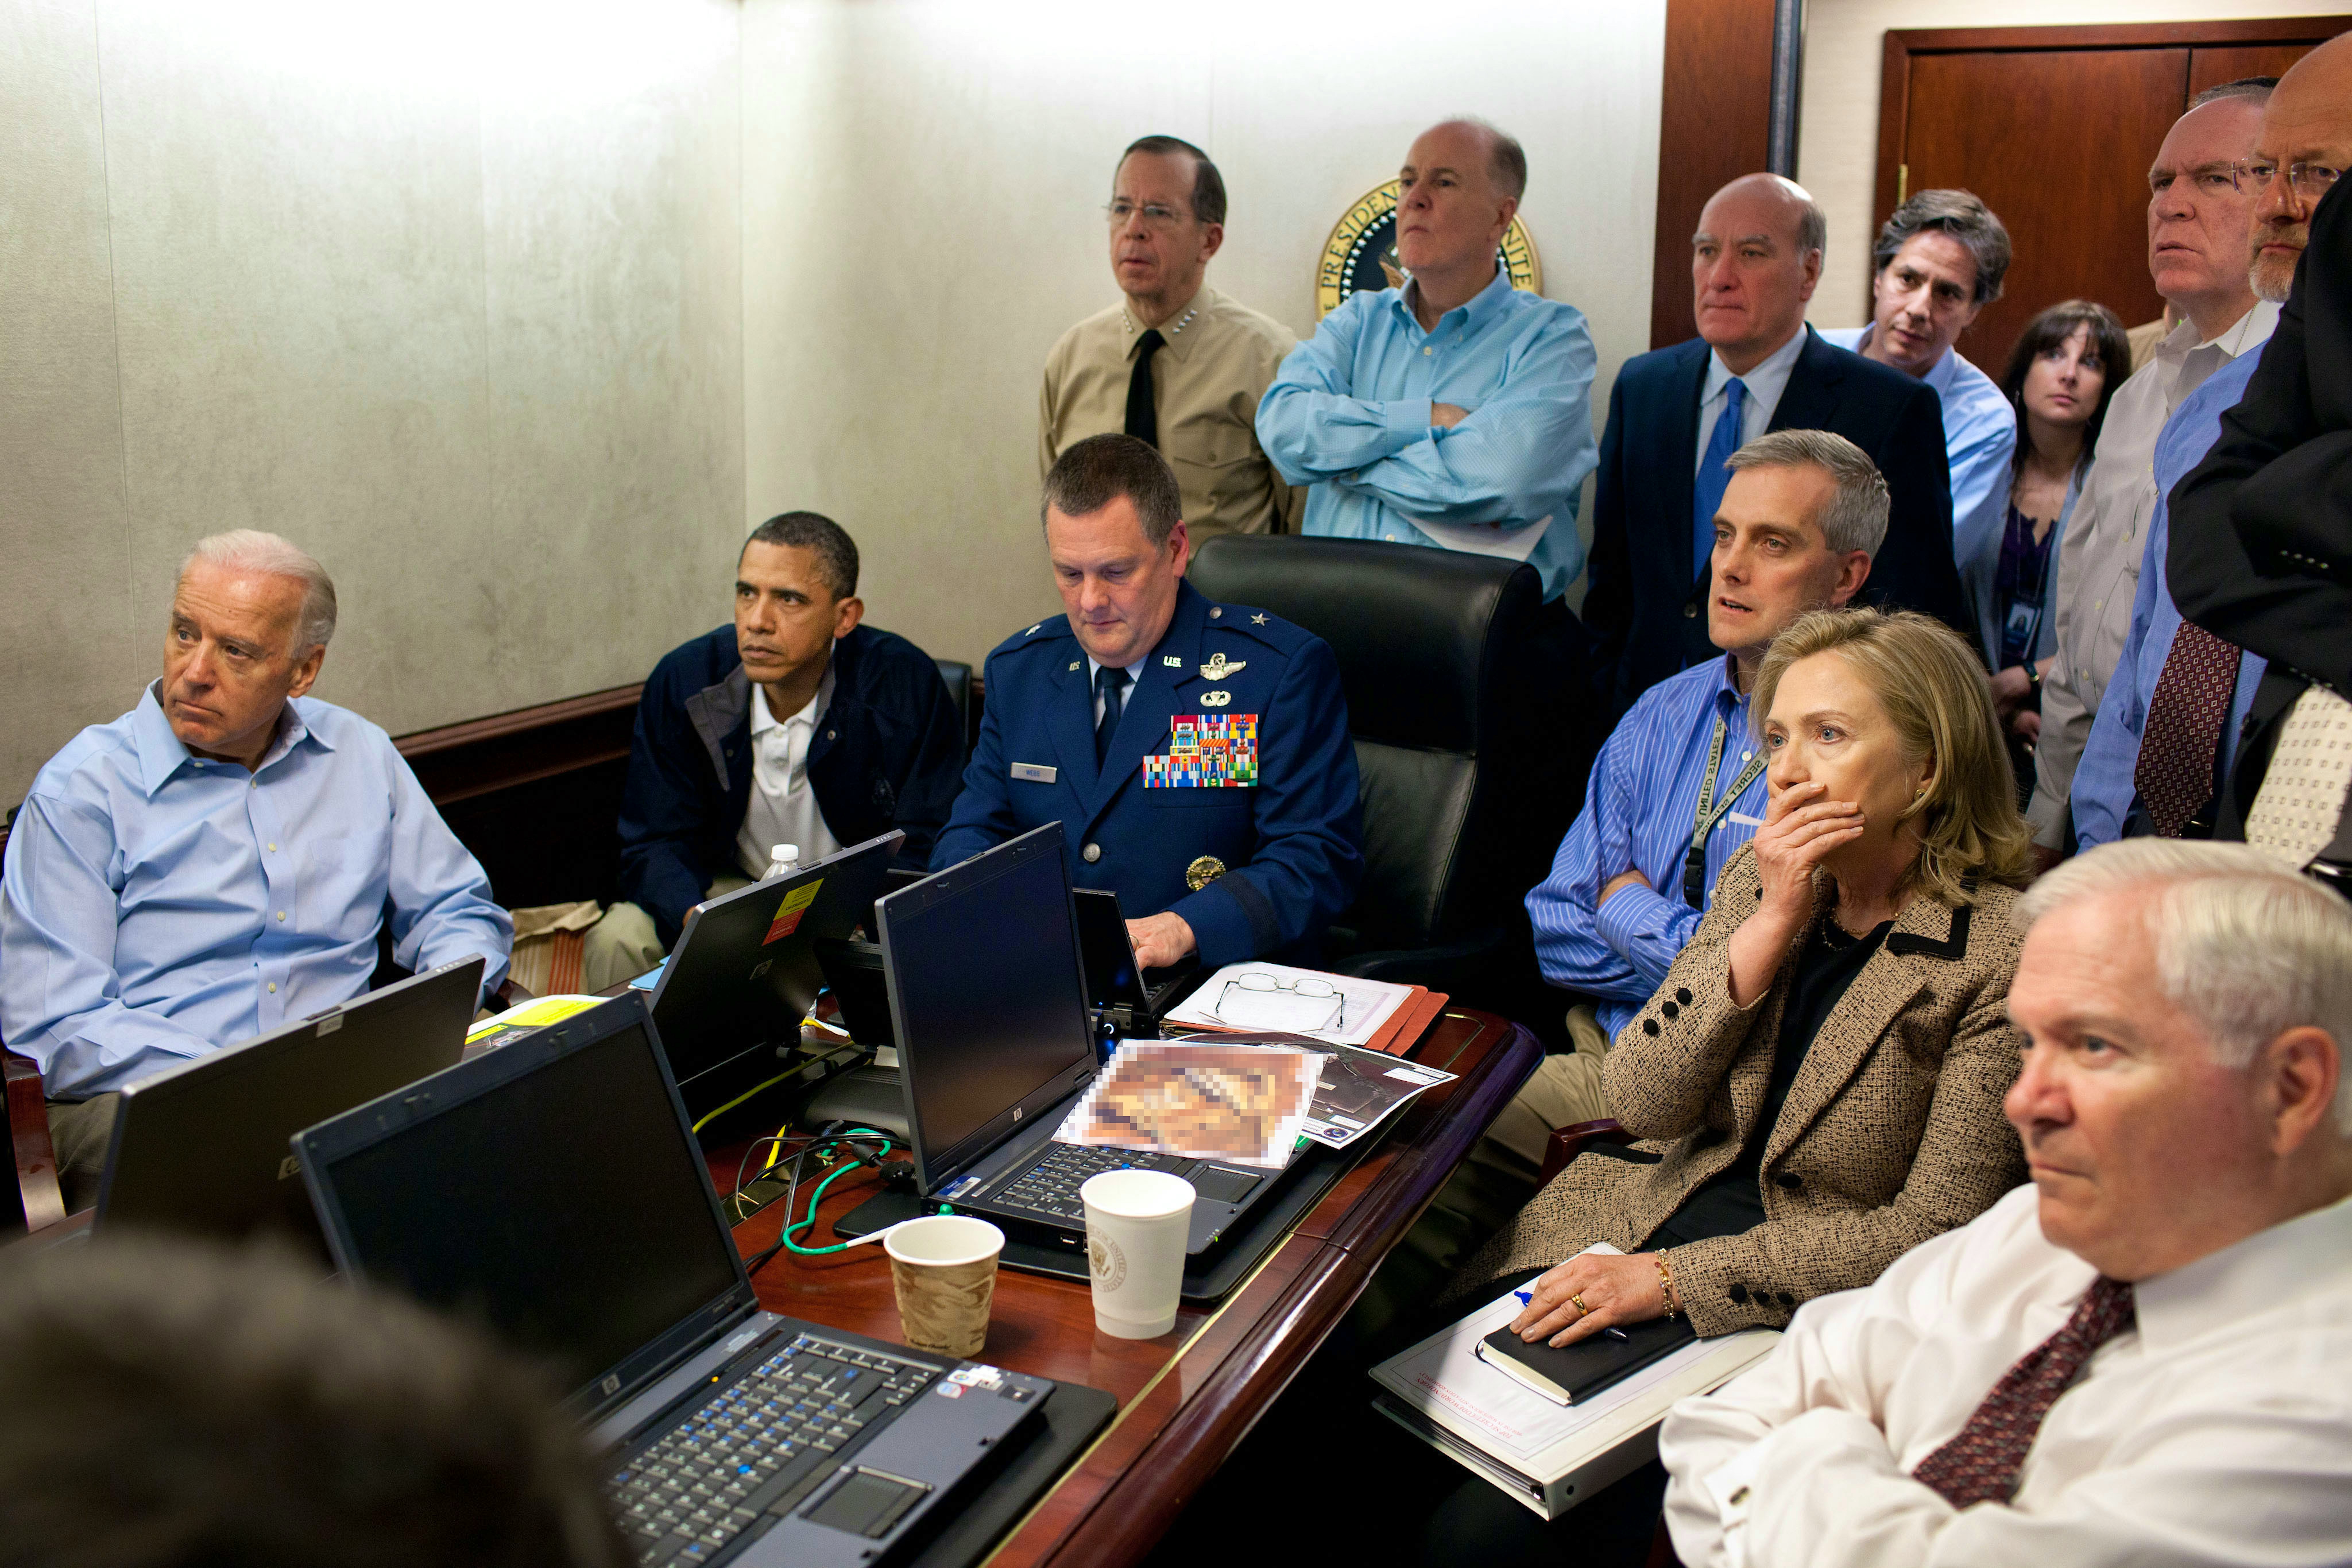 President Barack Obama, Vice President Joe Biden, Secretary of State Hillary Clinton and members of the national security team receive an update on the mission against Osama bin Laden in the Situation Room of the White House May 1, 2011 in Washington, DC. Obama later announced that the United States had killed Bin Laden in an operation led by U.S. Special Forces at a compound in Abbottabad, Pakistan. 